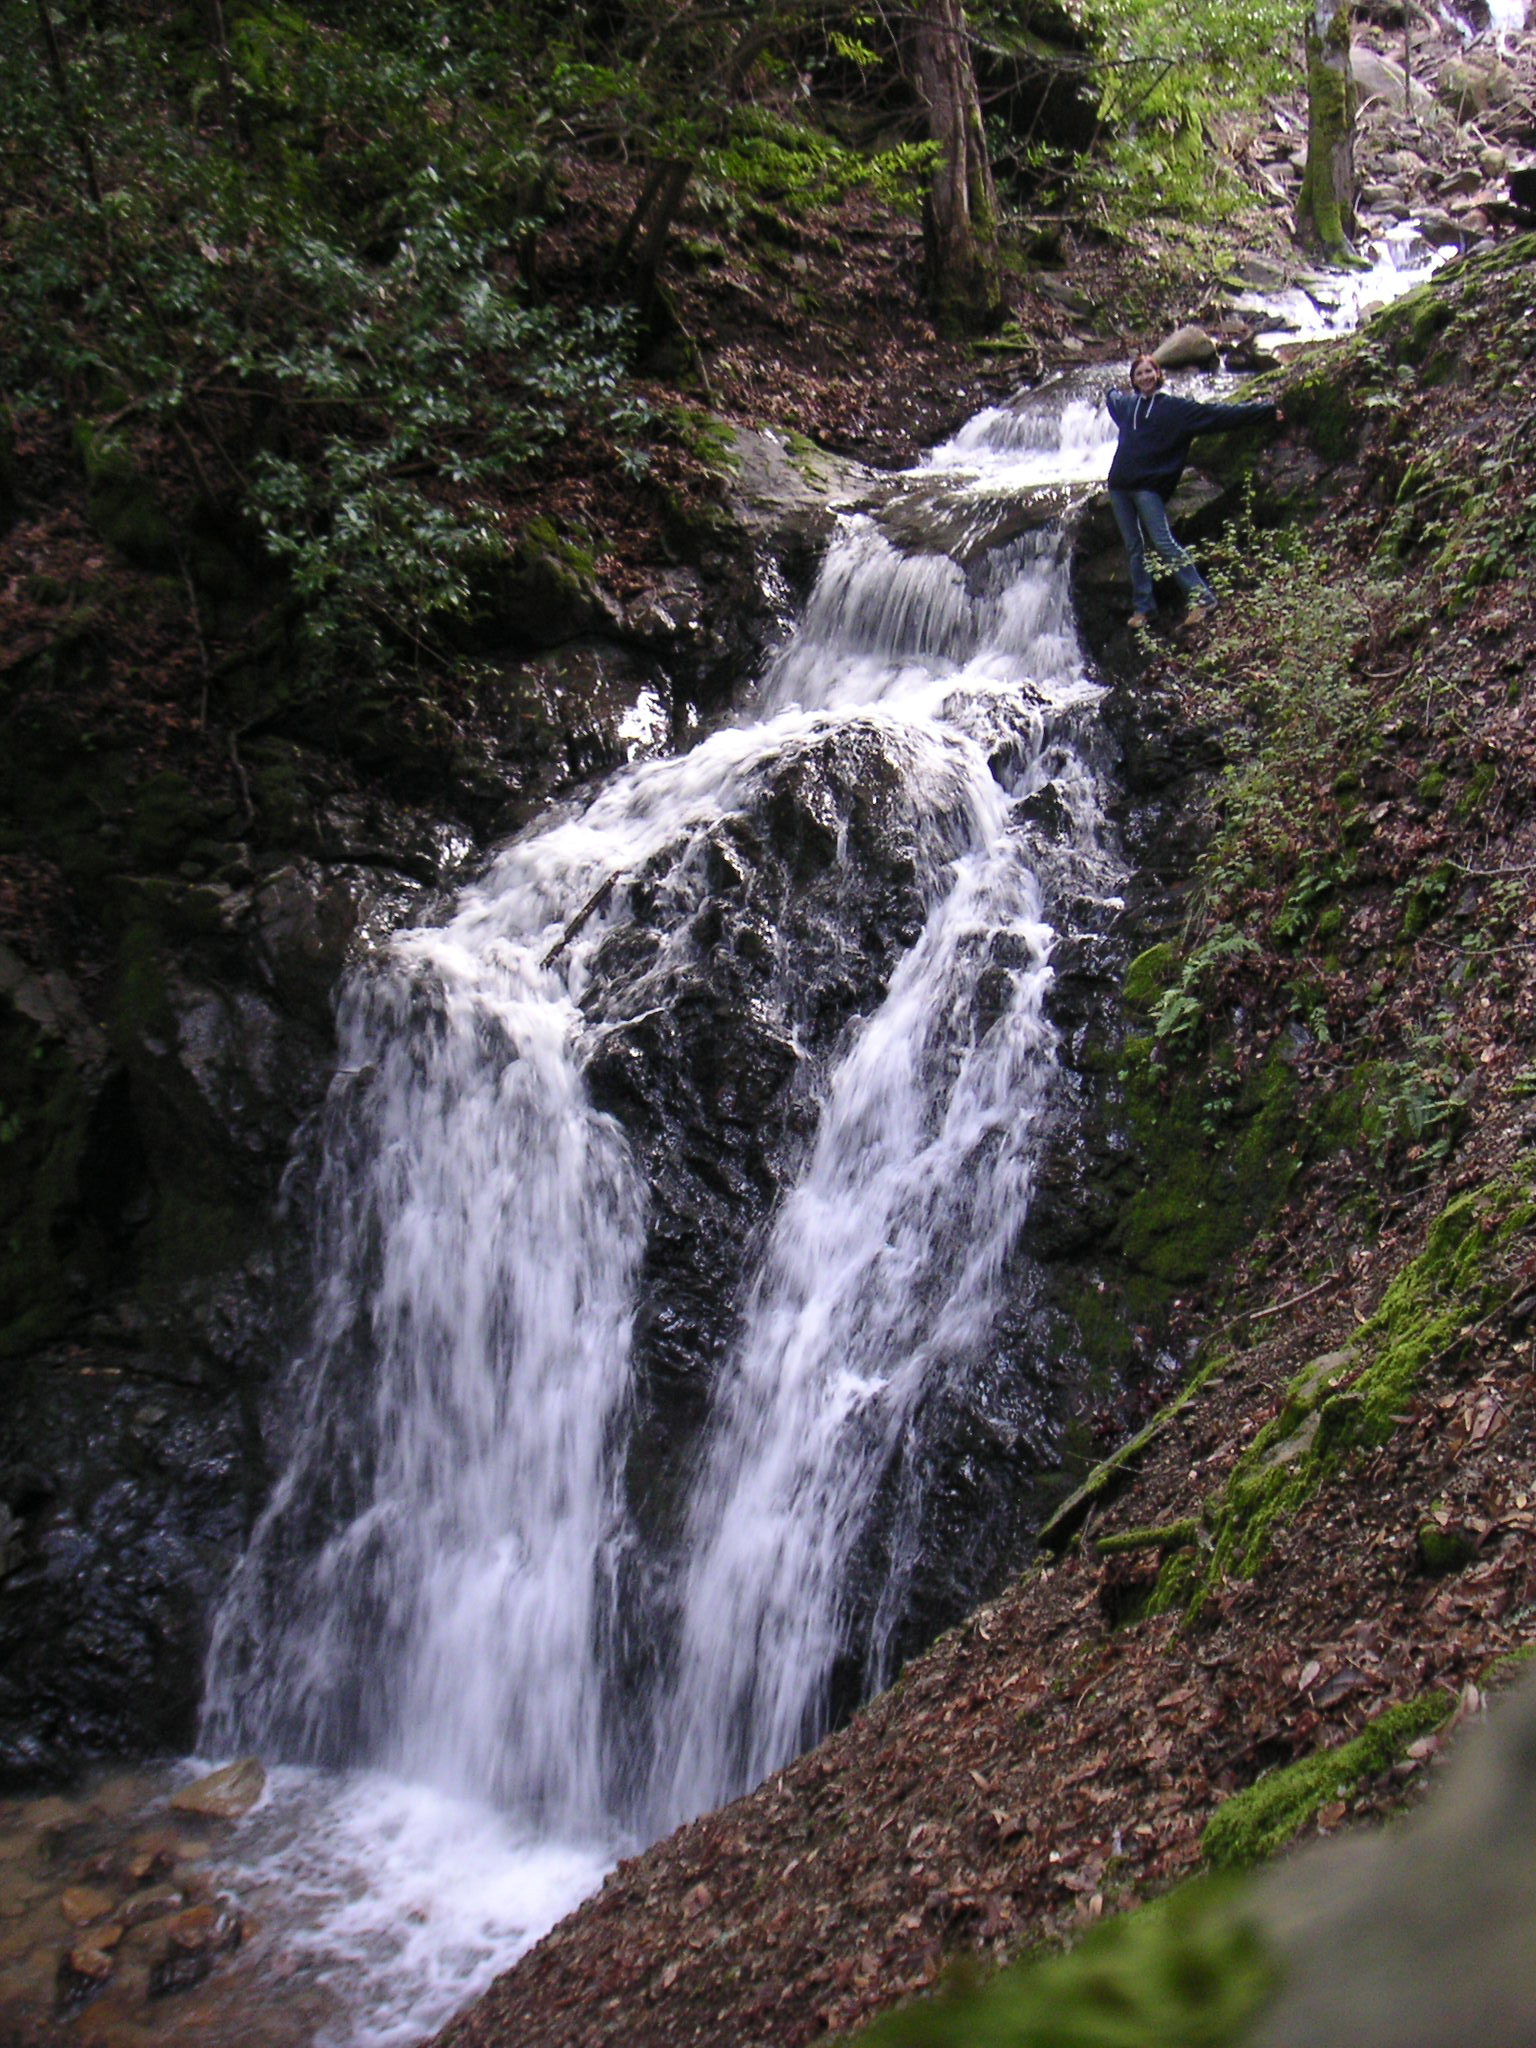 waterfall near road with parked cars in area